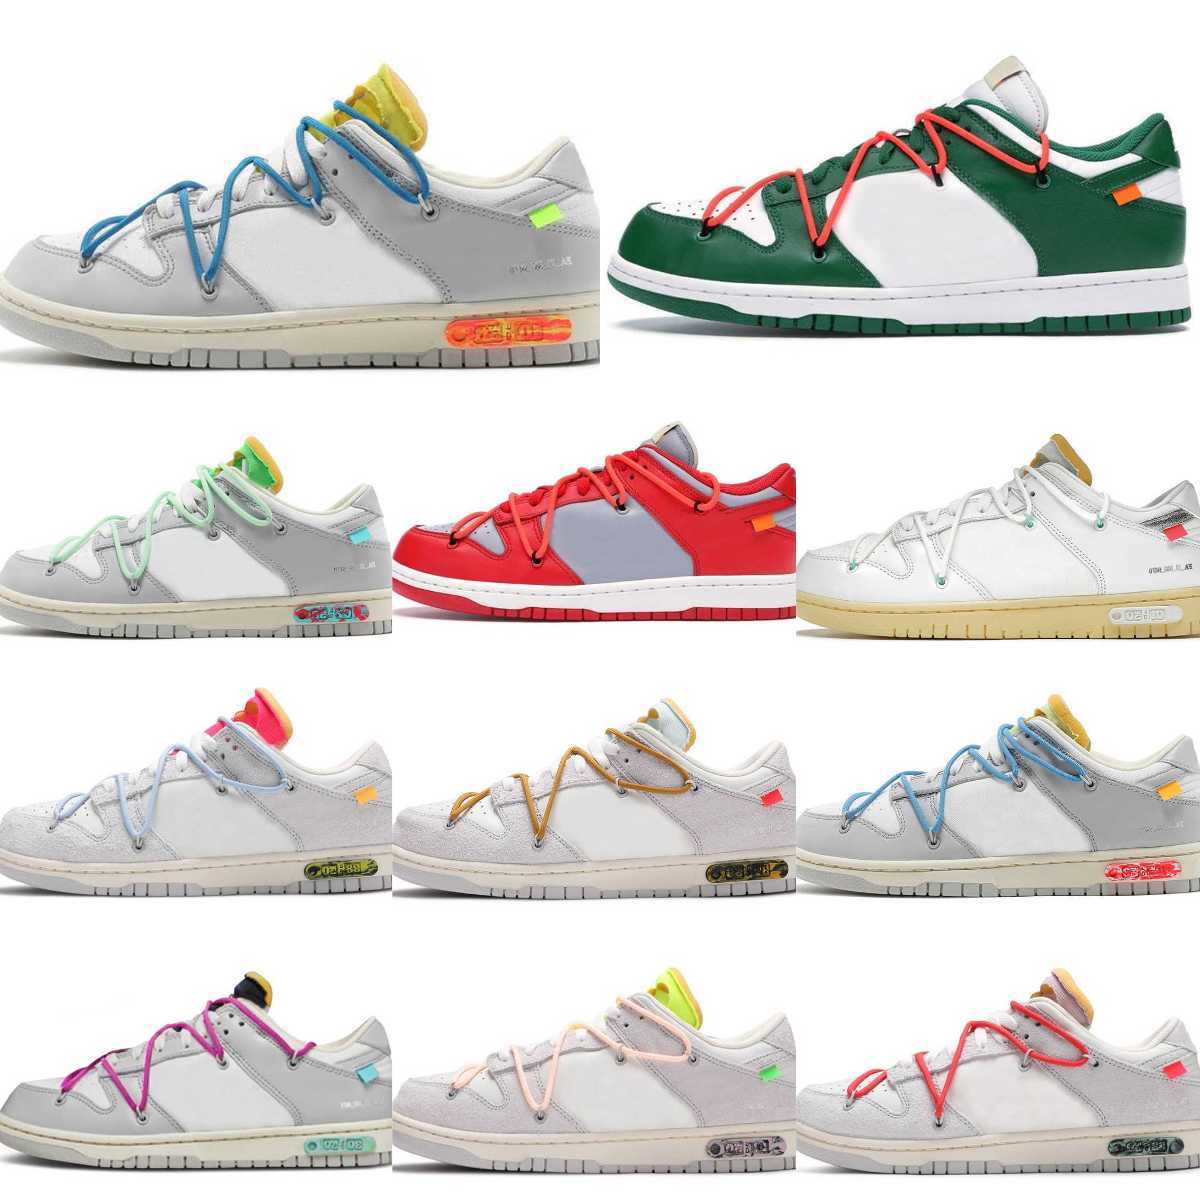 

Trainer Dunks Low Casual Sports Shoes Mens Women SB Seafoam Lot 01 09 17 Of 50 University Red Pine Green OW White The 50 TS Night Of Mischief Sail Grey Chicago Sneakers S6, Please contact us